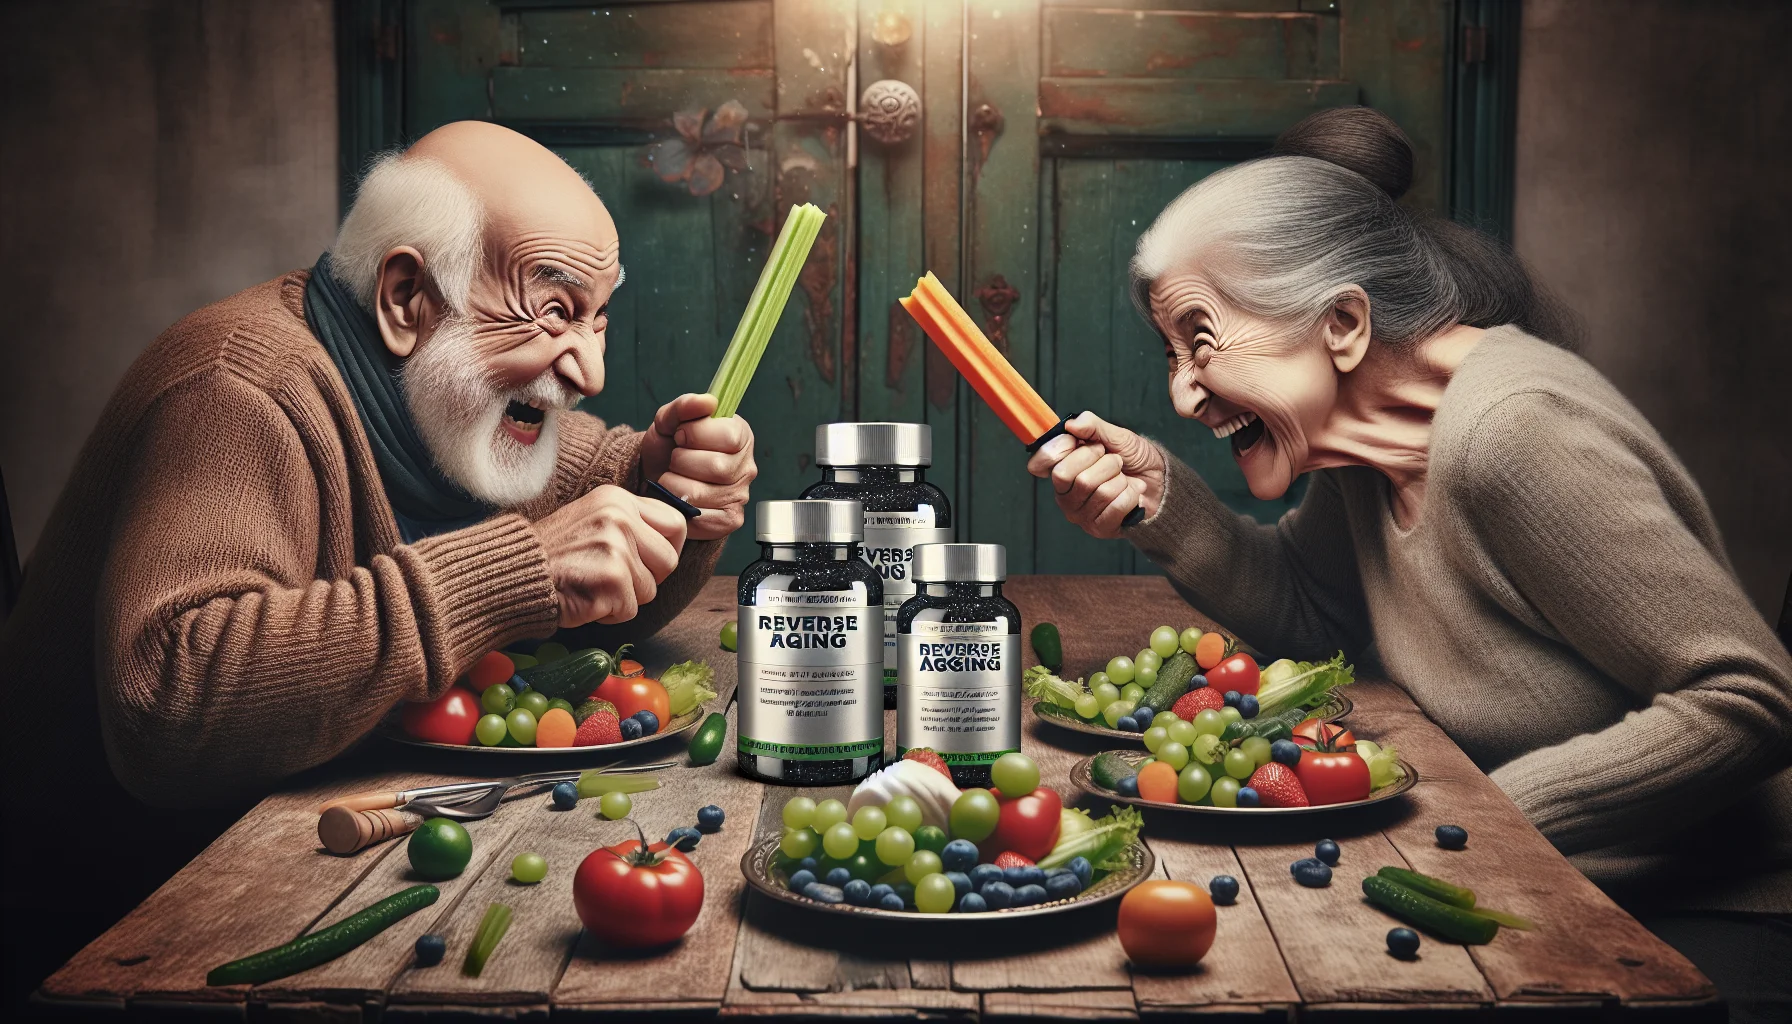 Visualize a humorous scenario where an elderly man and woman, of Hispanic and Middle-Eastern descent respectively, are sitting at a rustic dining table laden with plates of colorful, healthy food. The sparkling supplement bottles, labeled 'Reverse Aging', catch the light in the corner of the scene, as vibrant as the vegetables on the table. Despite their advanced age, they are engaged in a celery stick sword fight, doubling over with laughter. Their expressions are whimsical, and their eyes sparkle with youthful mischief, just as the bottles of supplements suggest they should.